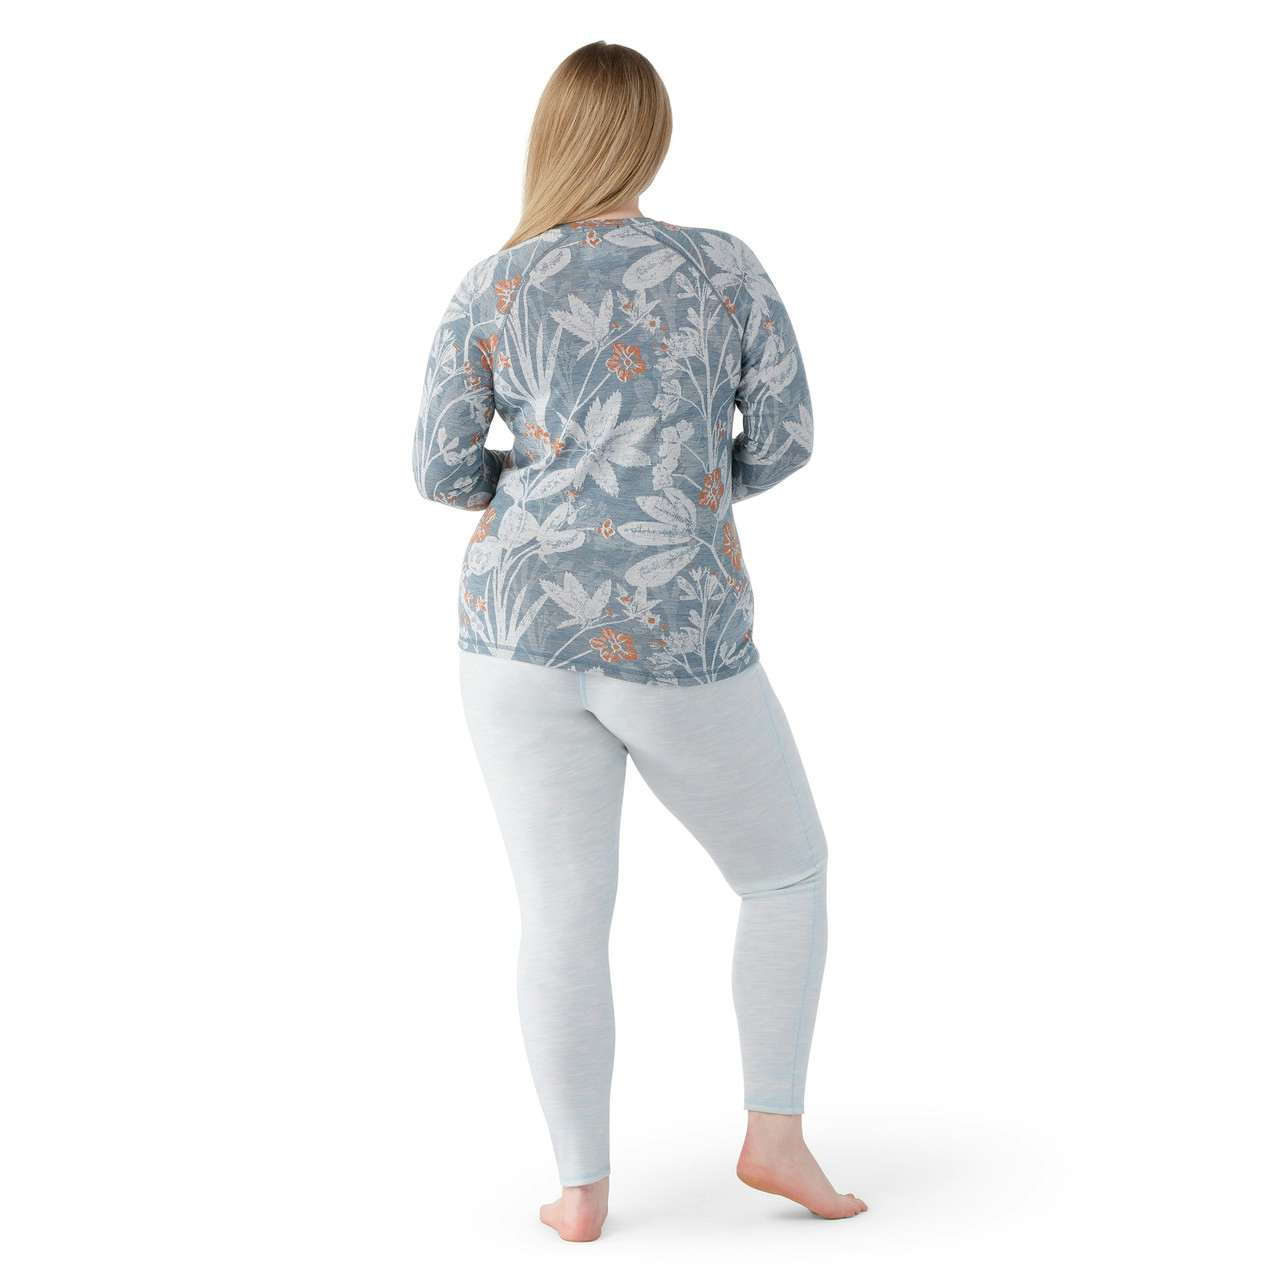 Classic Thermal Merino Base Layer Crew Winter Sky Floral